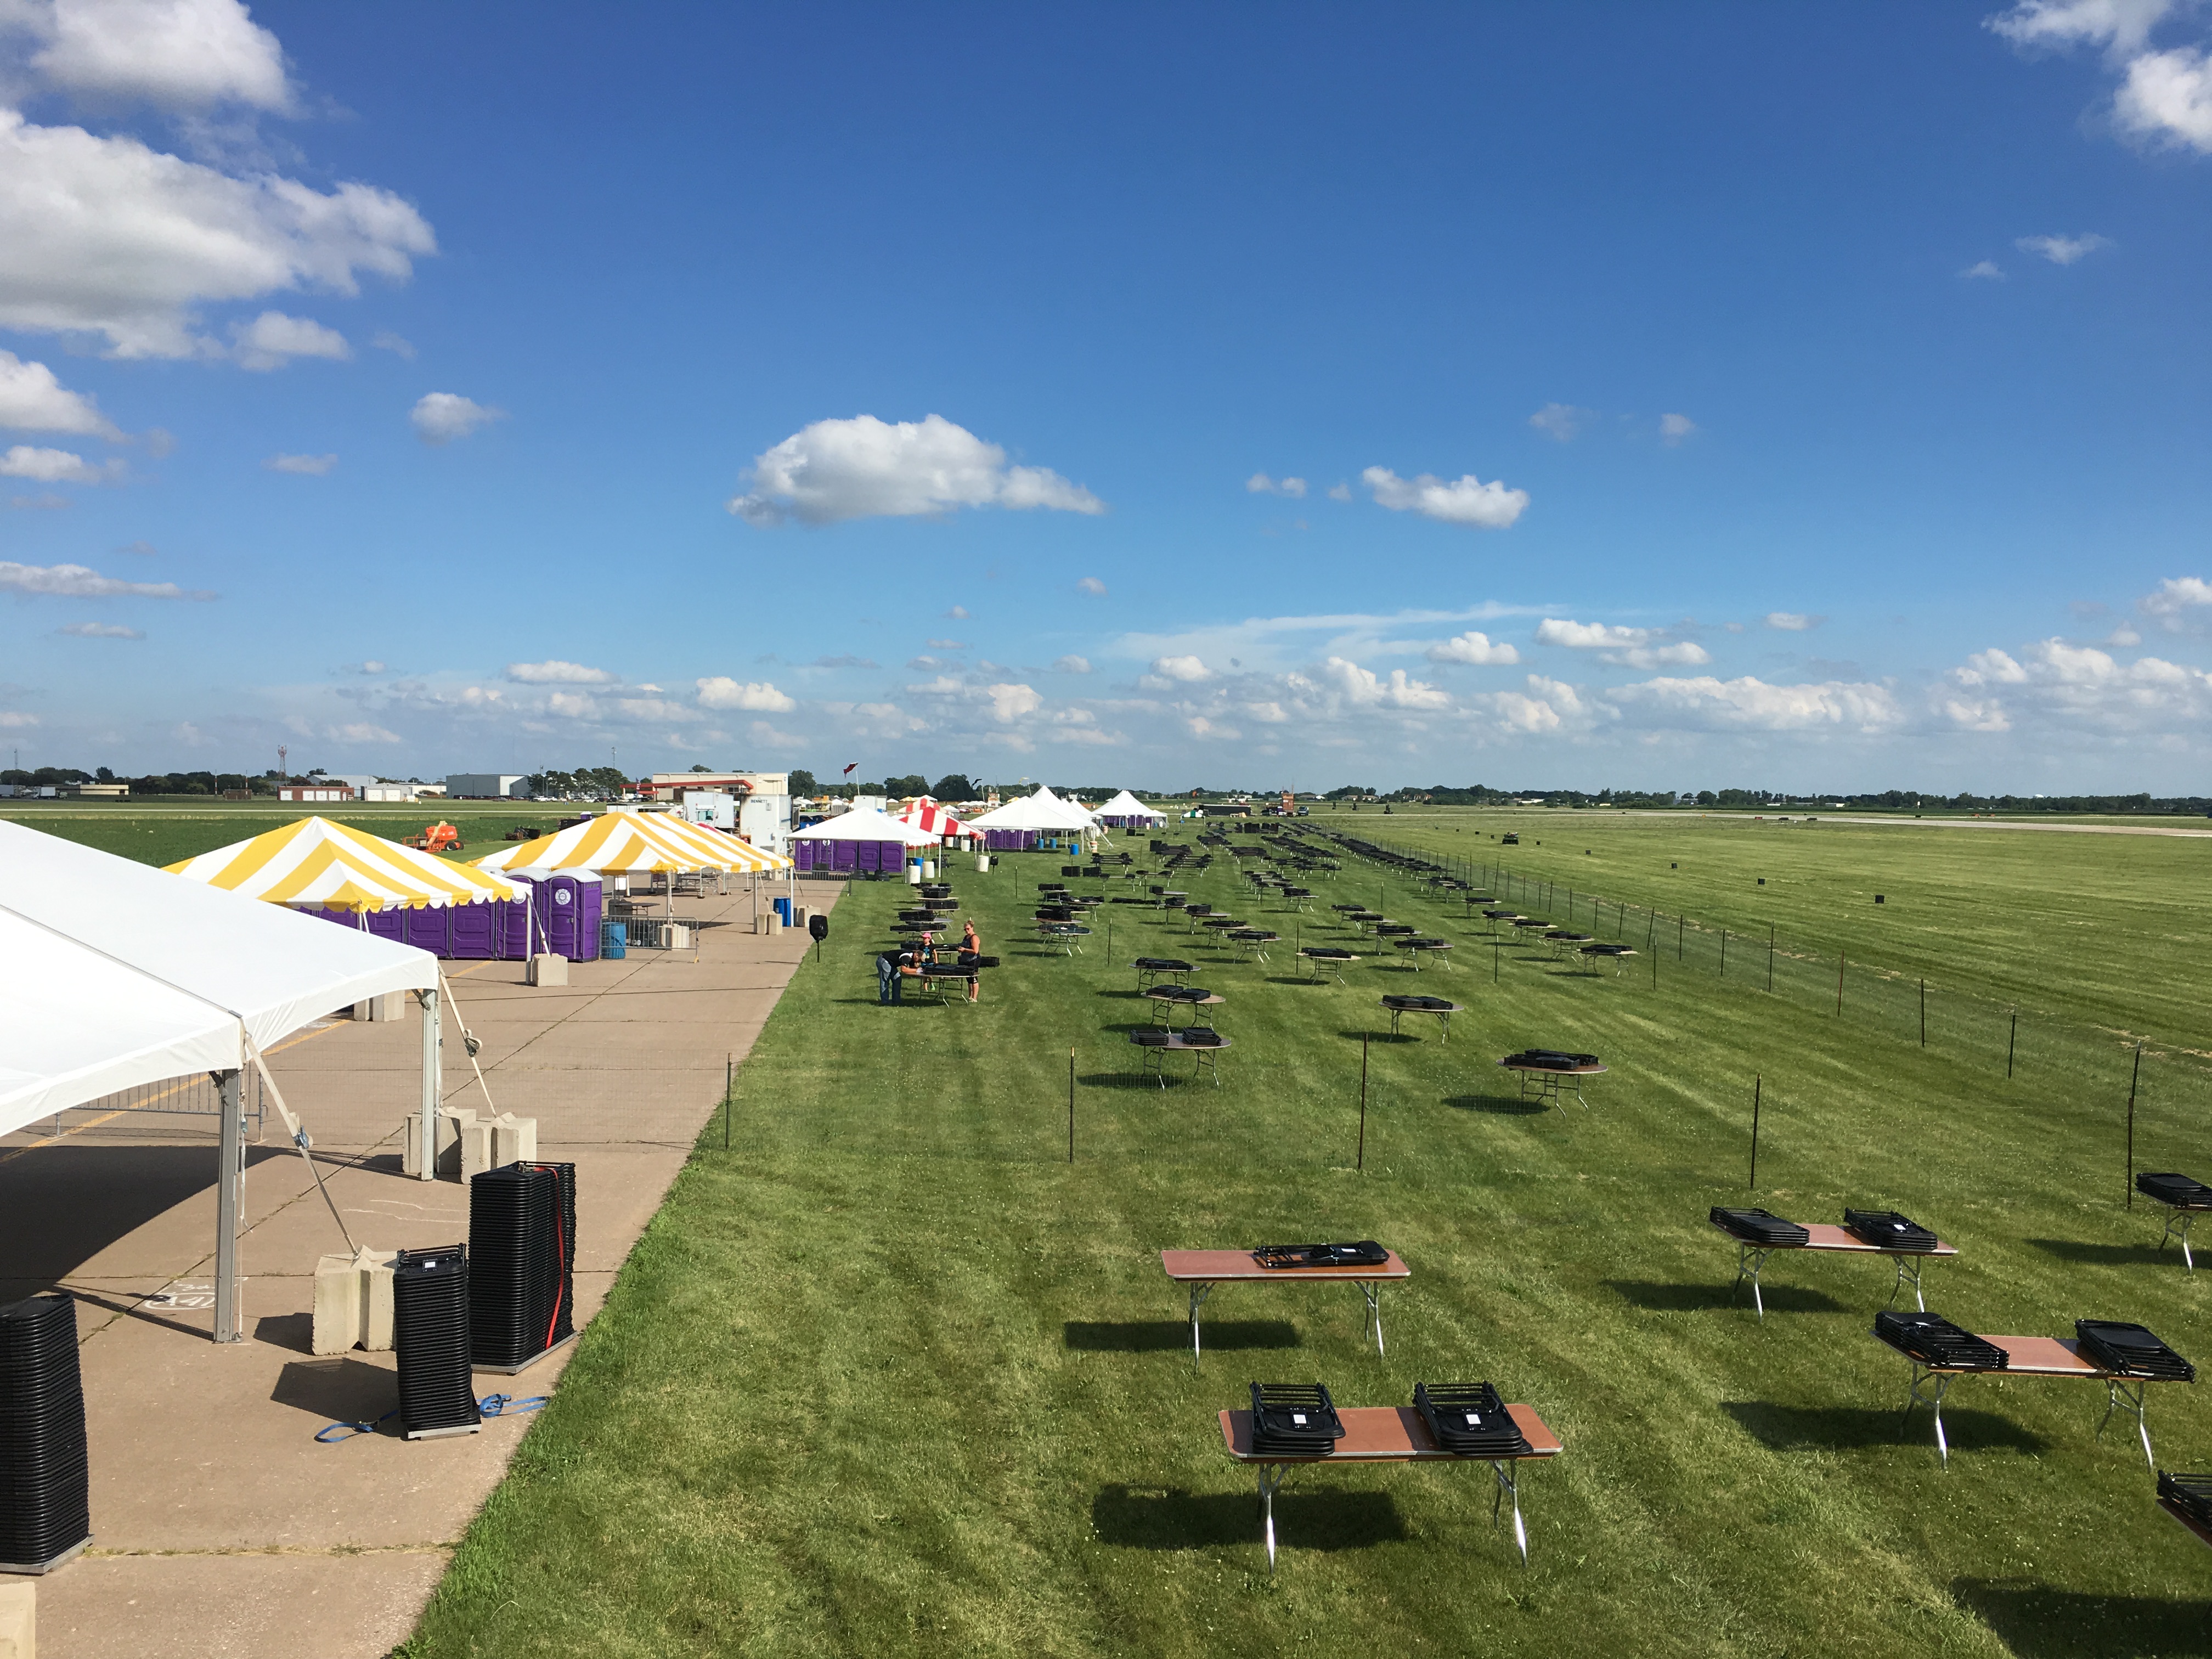 Lots of tents, tables and chairs at the 2016 Quad Cities Air Show